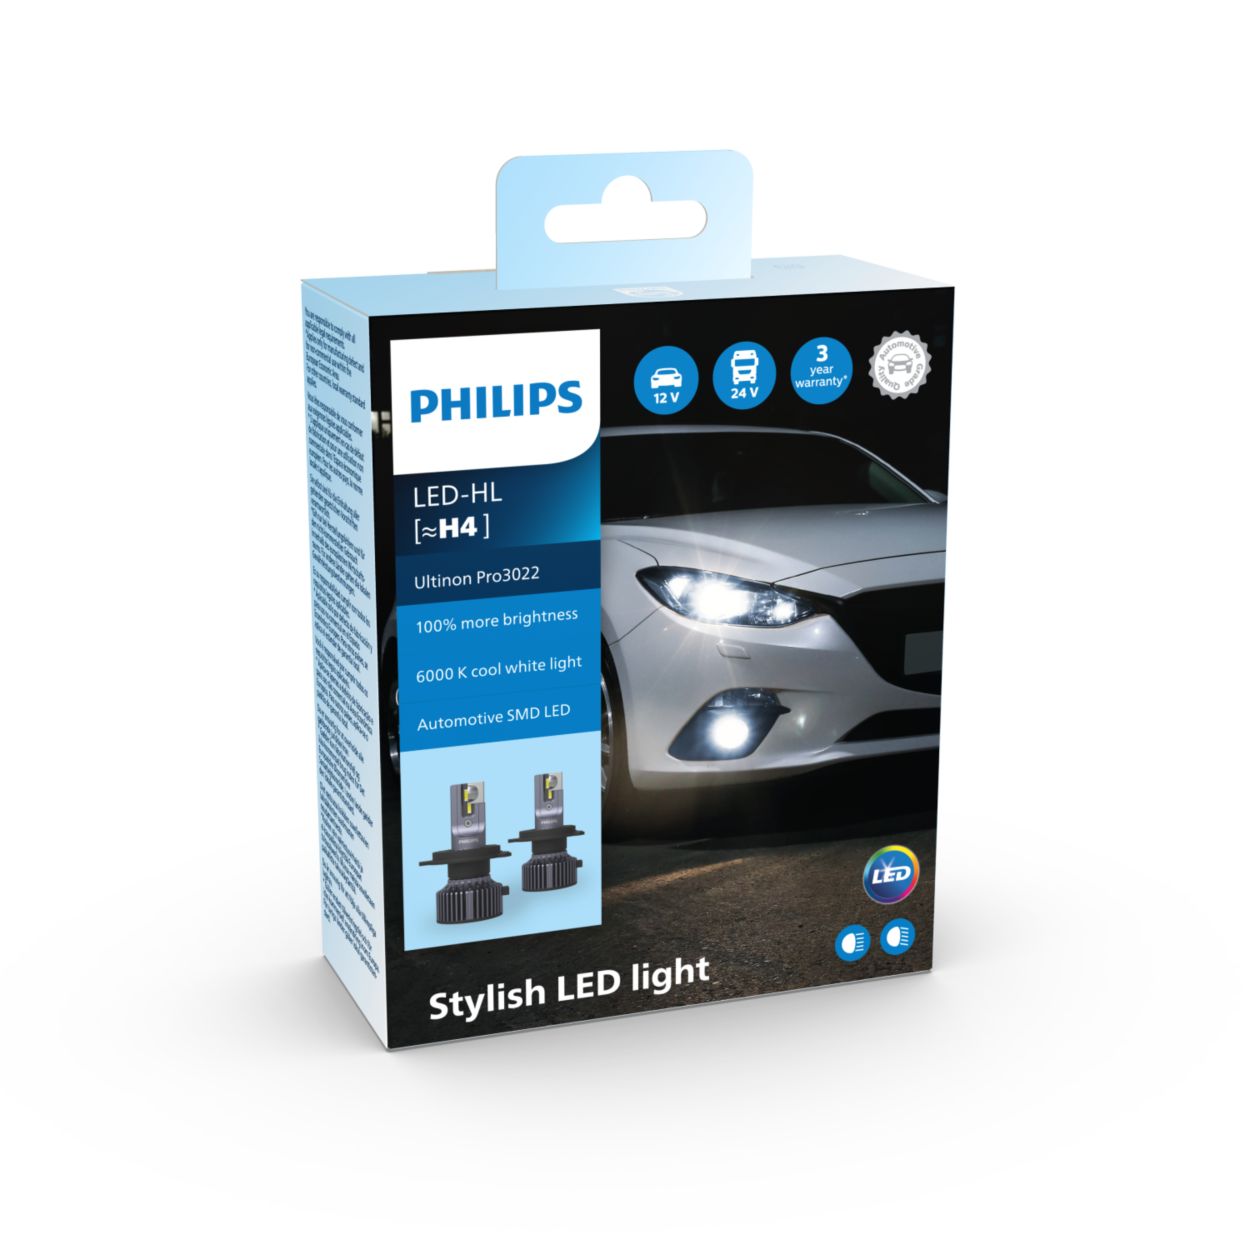 https://images.philips.com/is/image/philipsconsumer/77a61af9a88c47568e5bb07600d1eab3?$jpglarge$&wid=1250